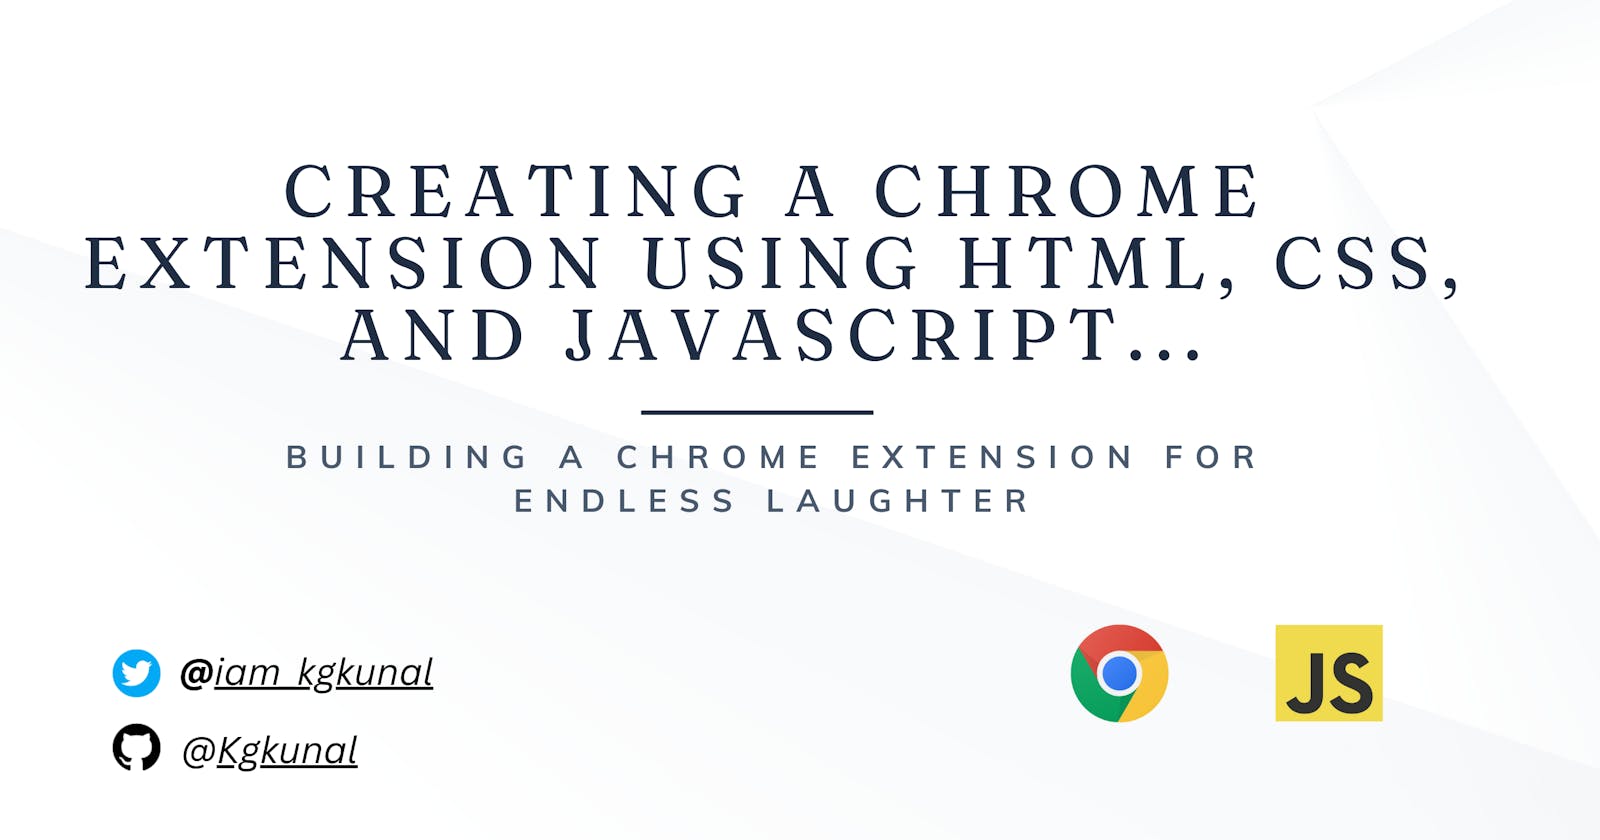 Building a Chrome Extension for Endless Laughter